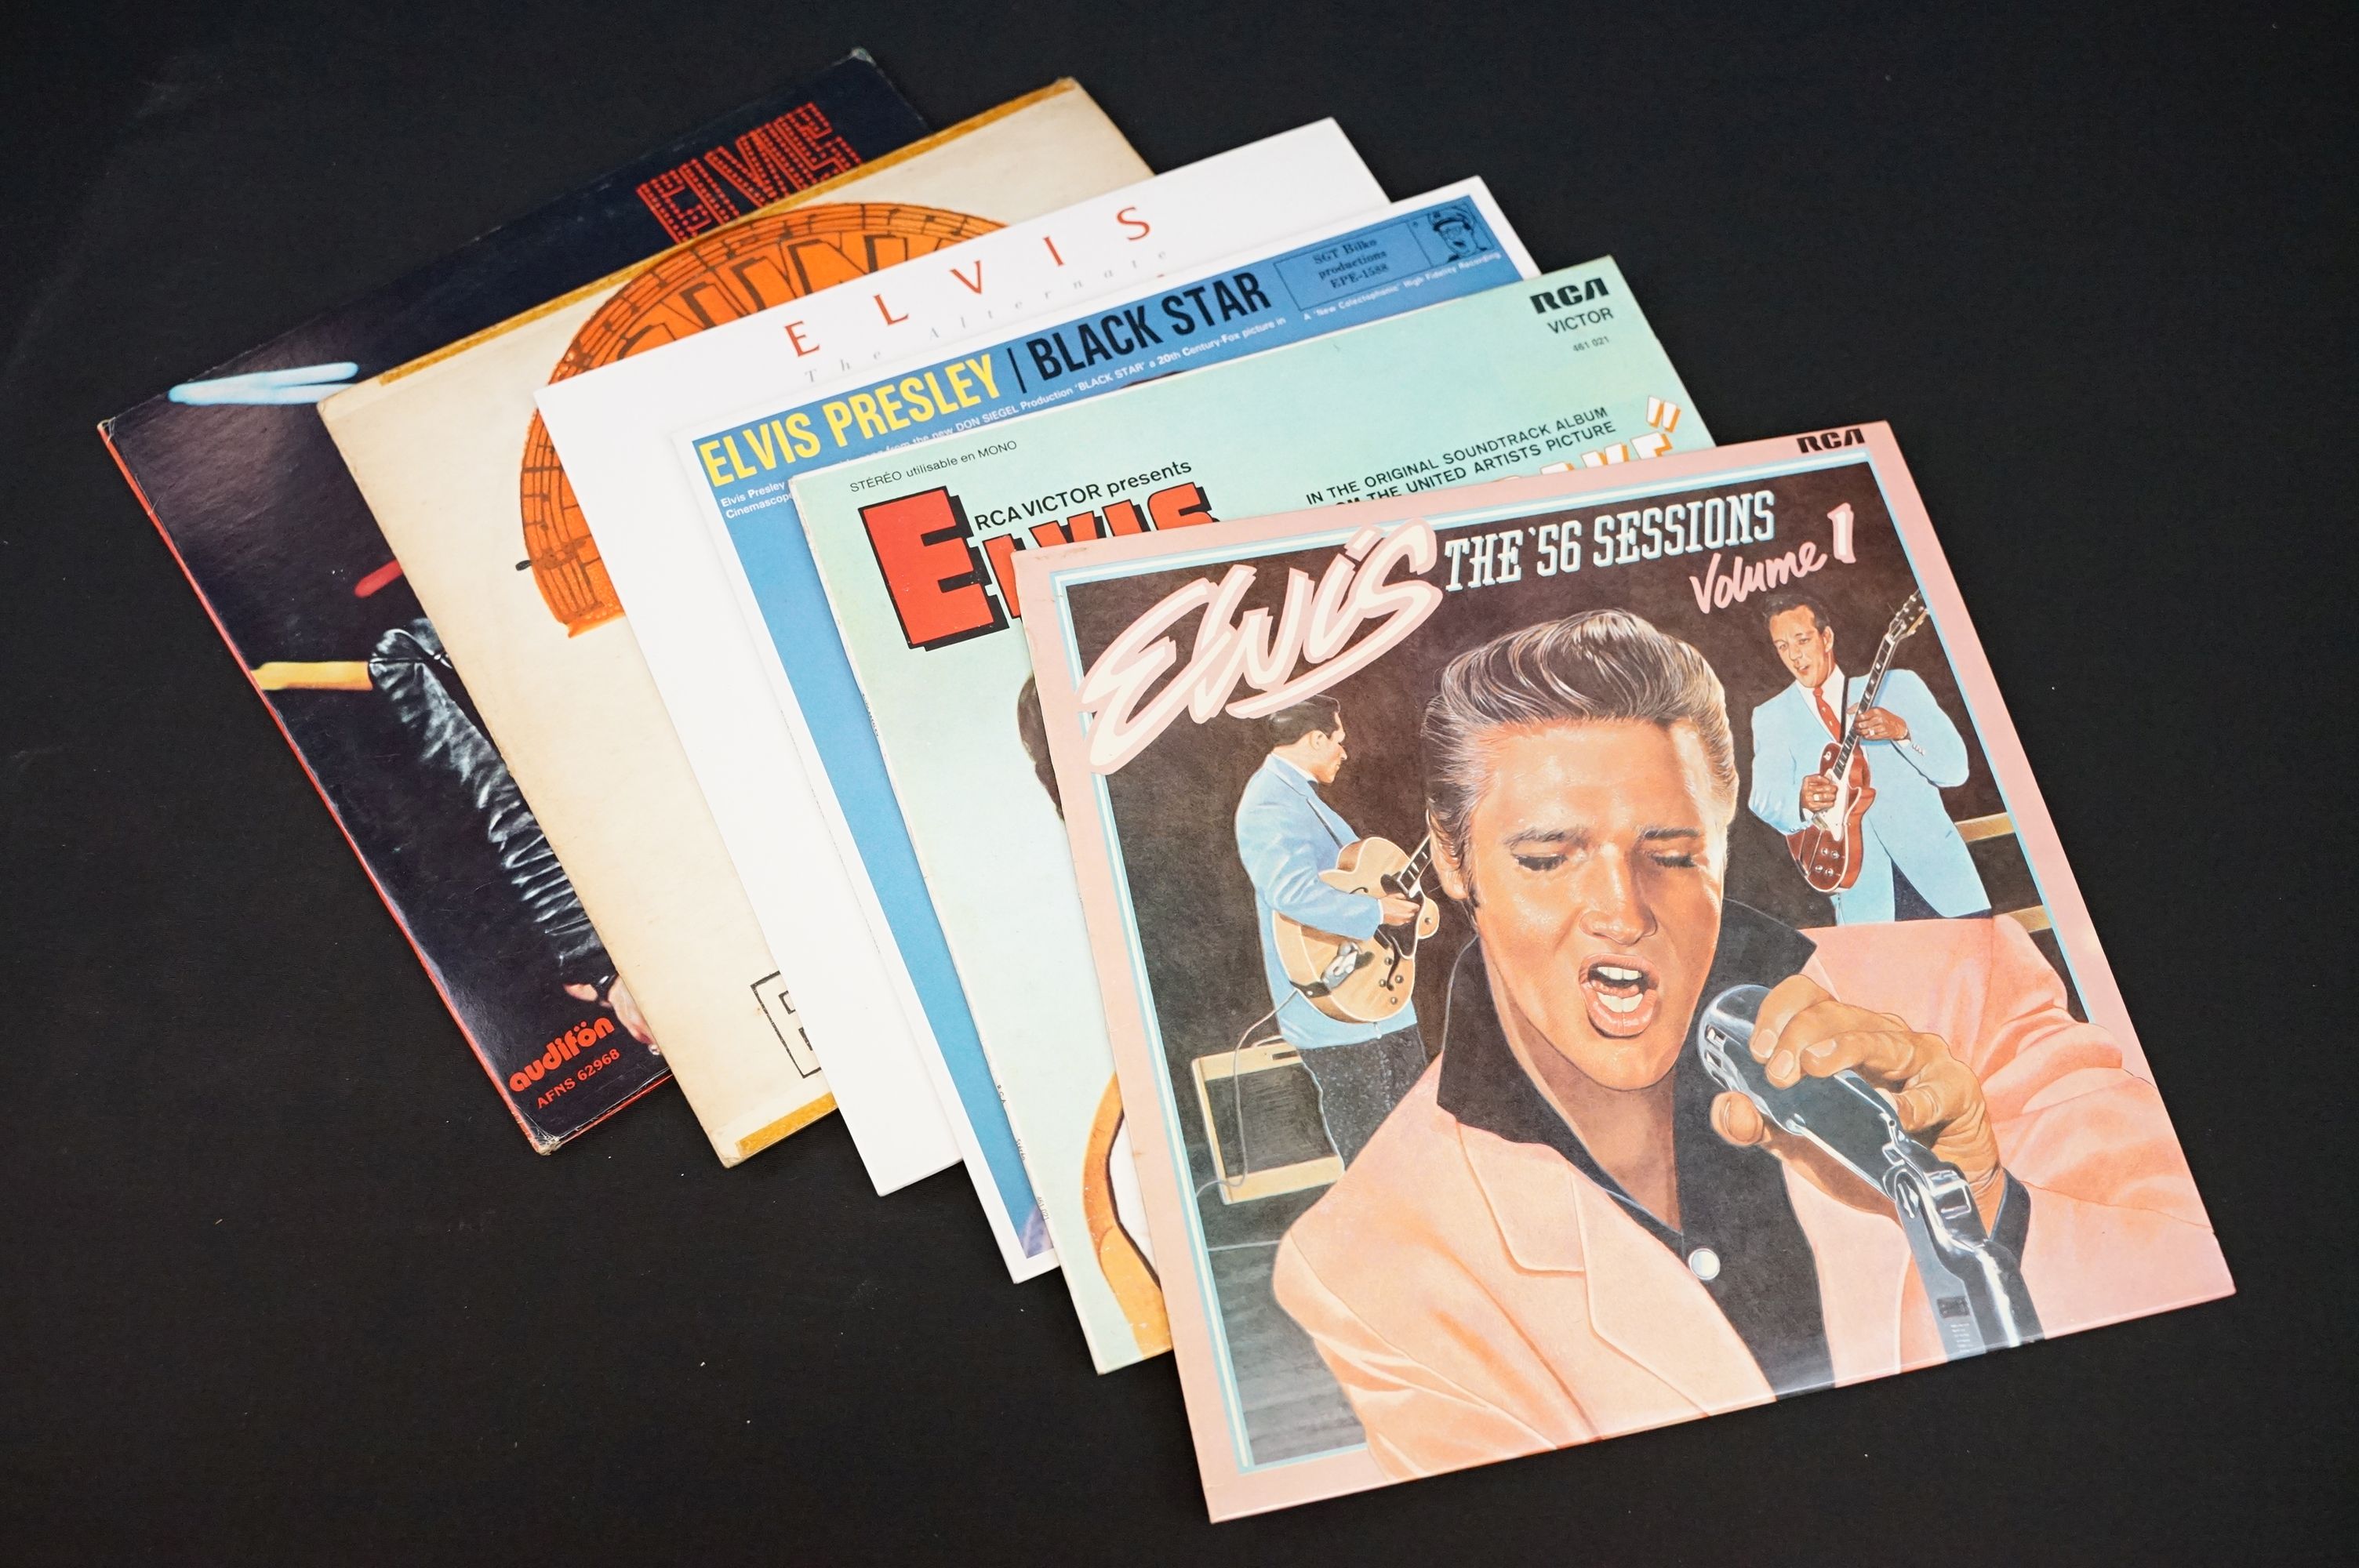 Vinyl - Over 80 Elvis Presley LPs spanning his career including foreign pressings, ltd editions - Image 3 of 5